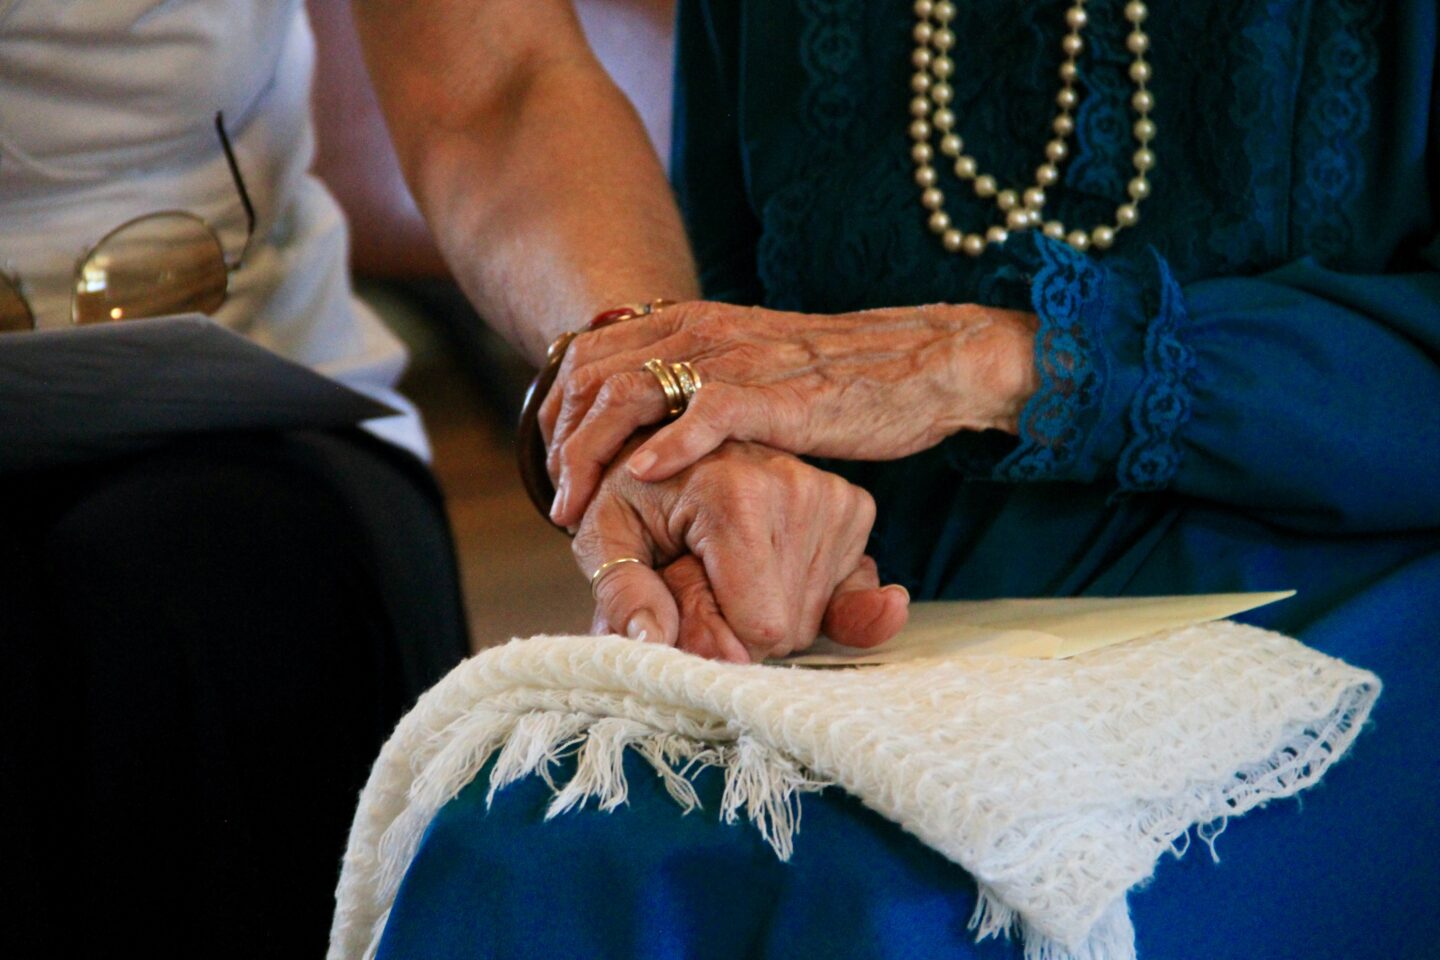 7 Ways To Include Your Grandparents On Your Wedding Day